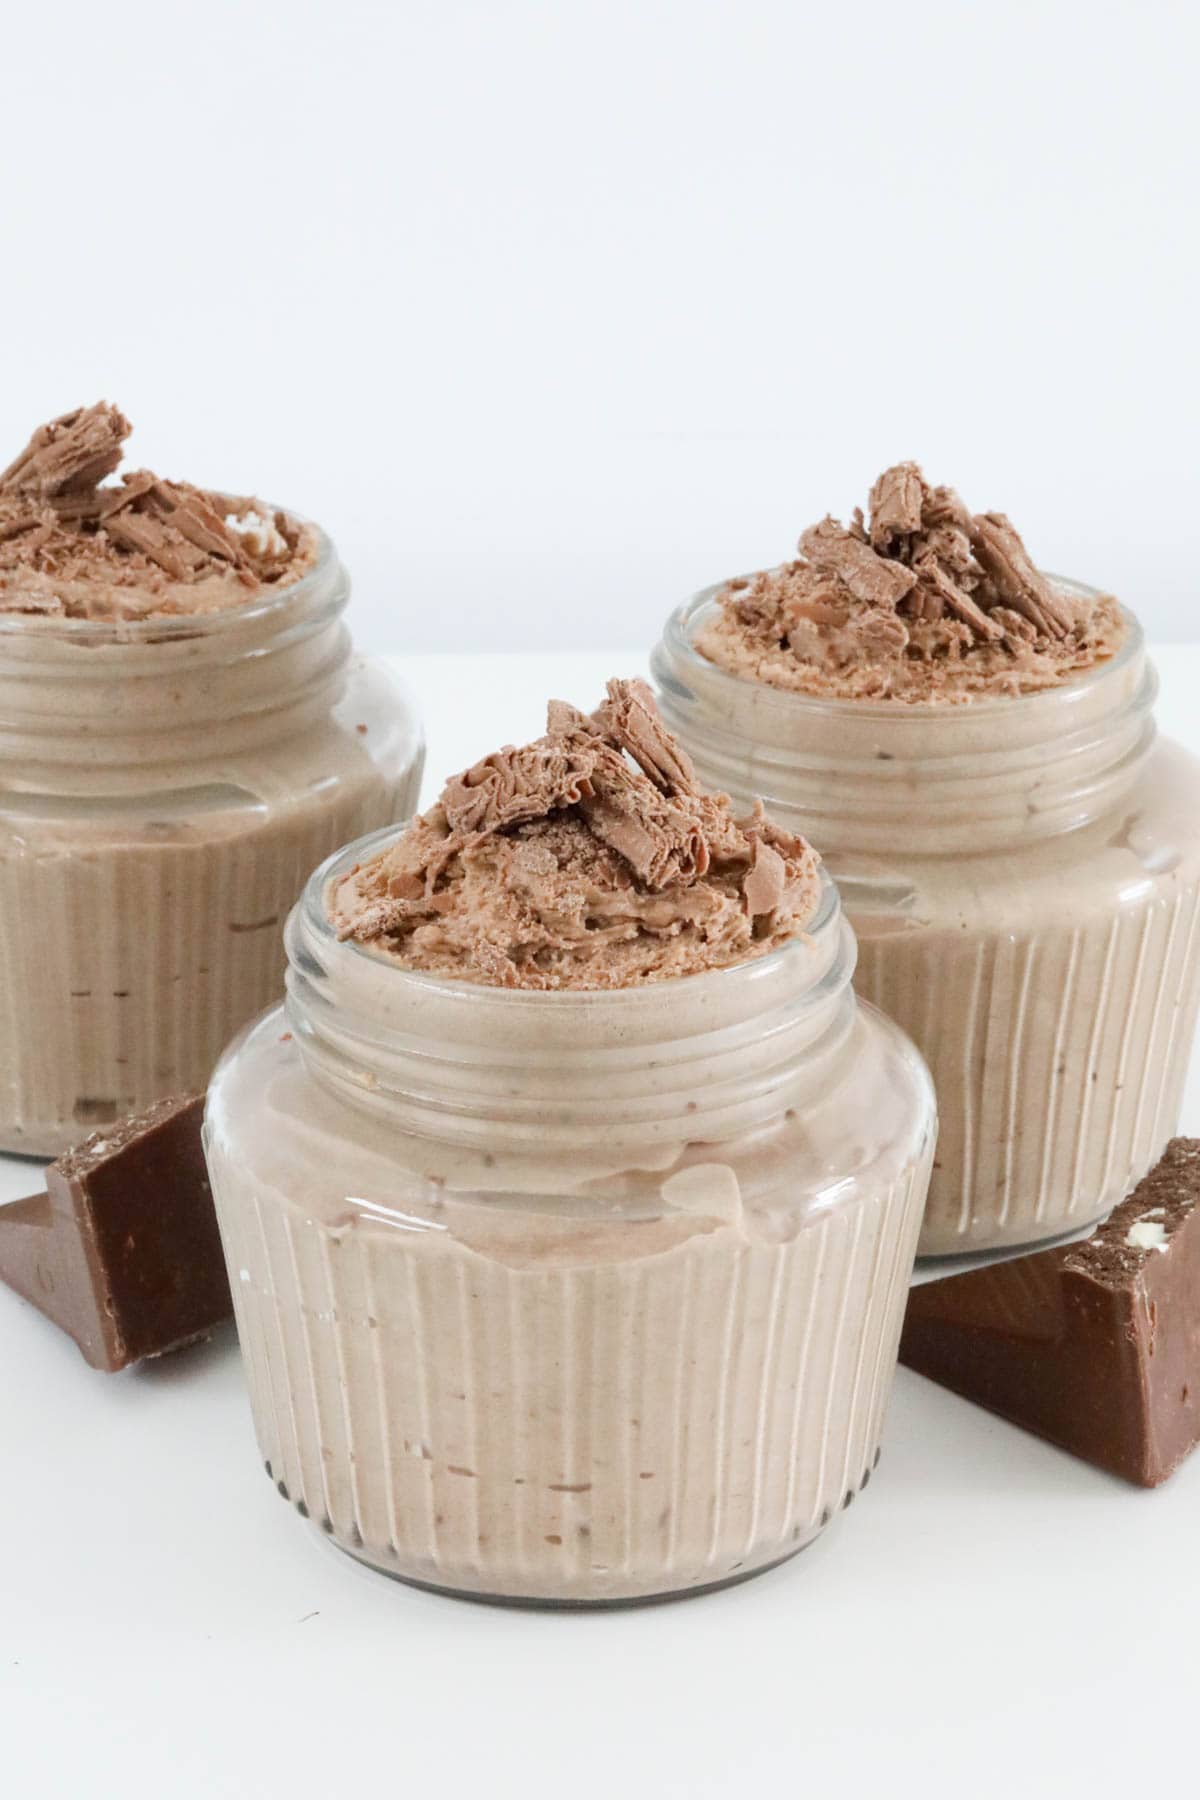 Three glass jars filled with Toblerone mousse and decorated with crumbled chocolate Flake.